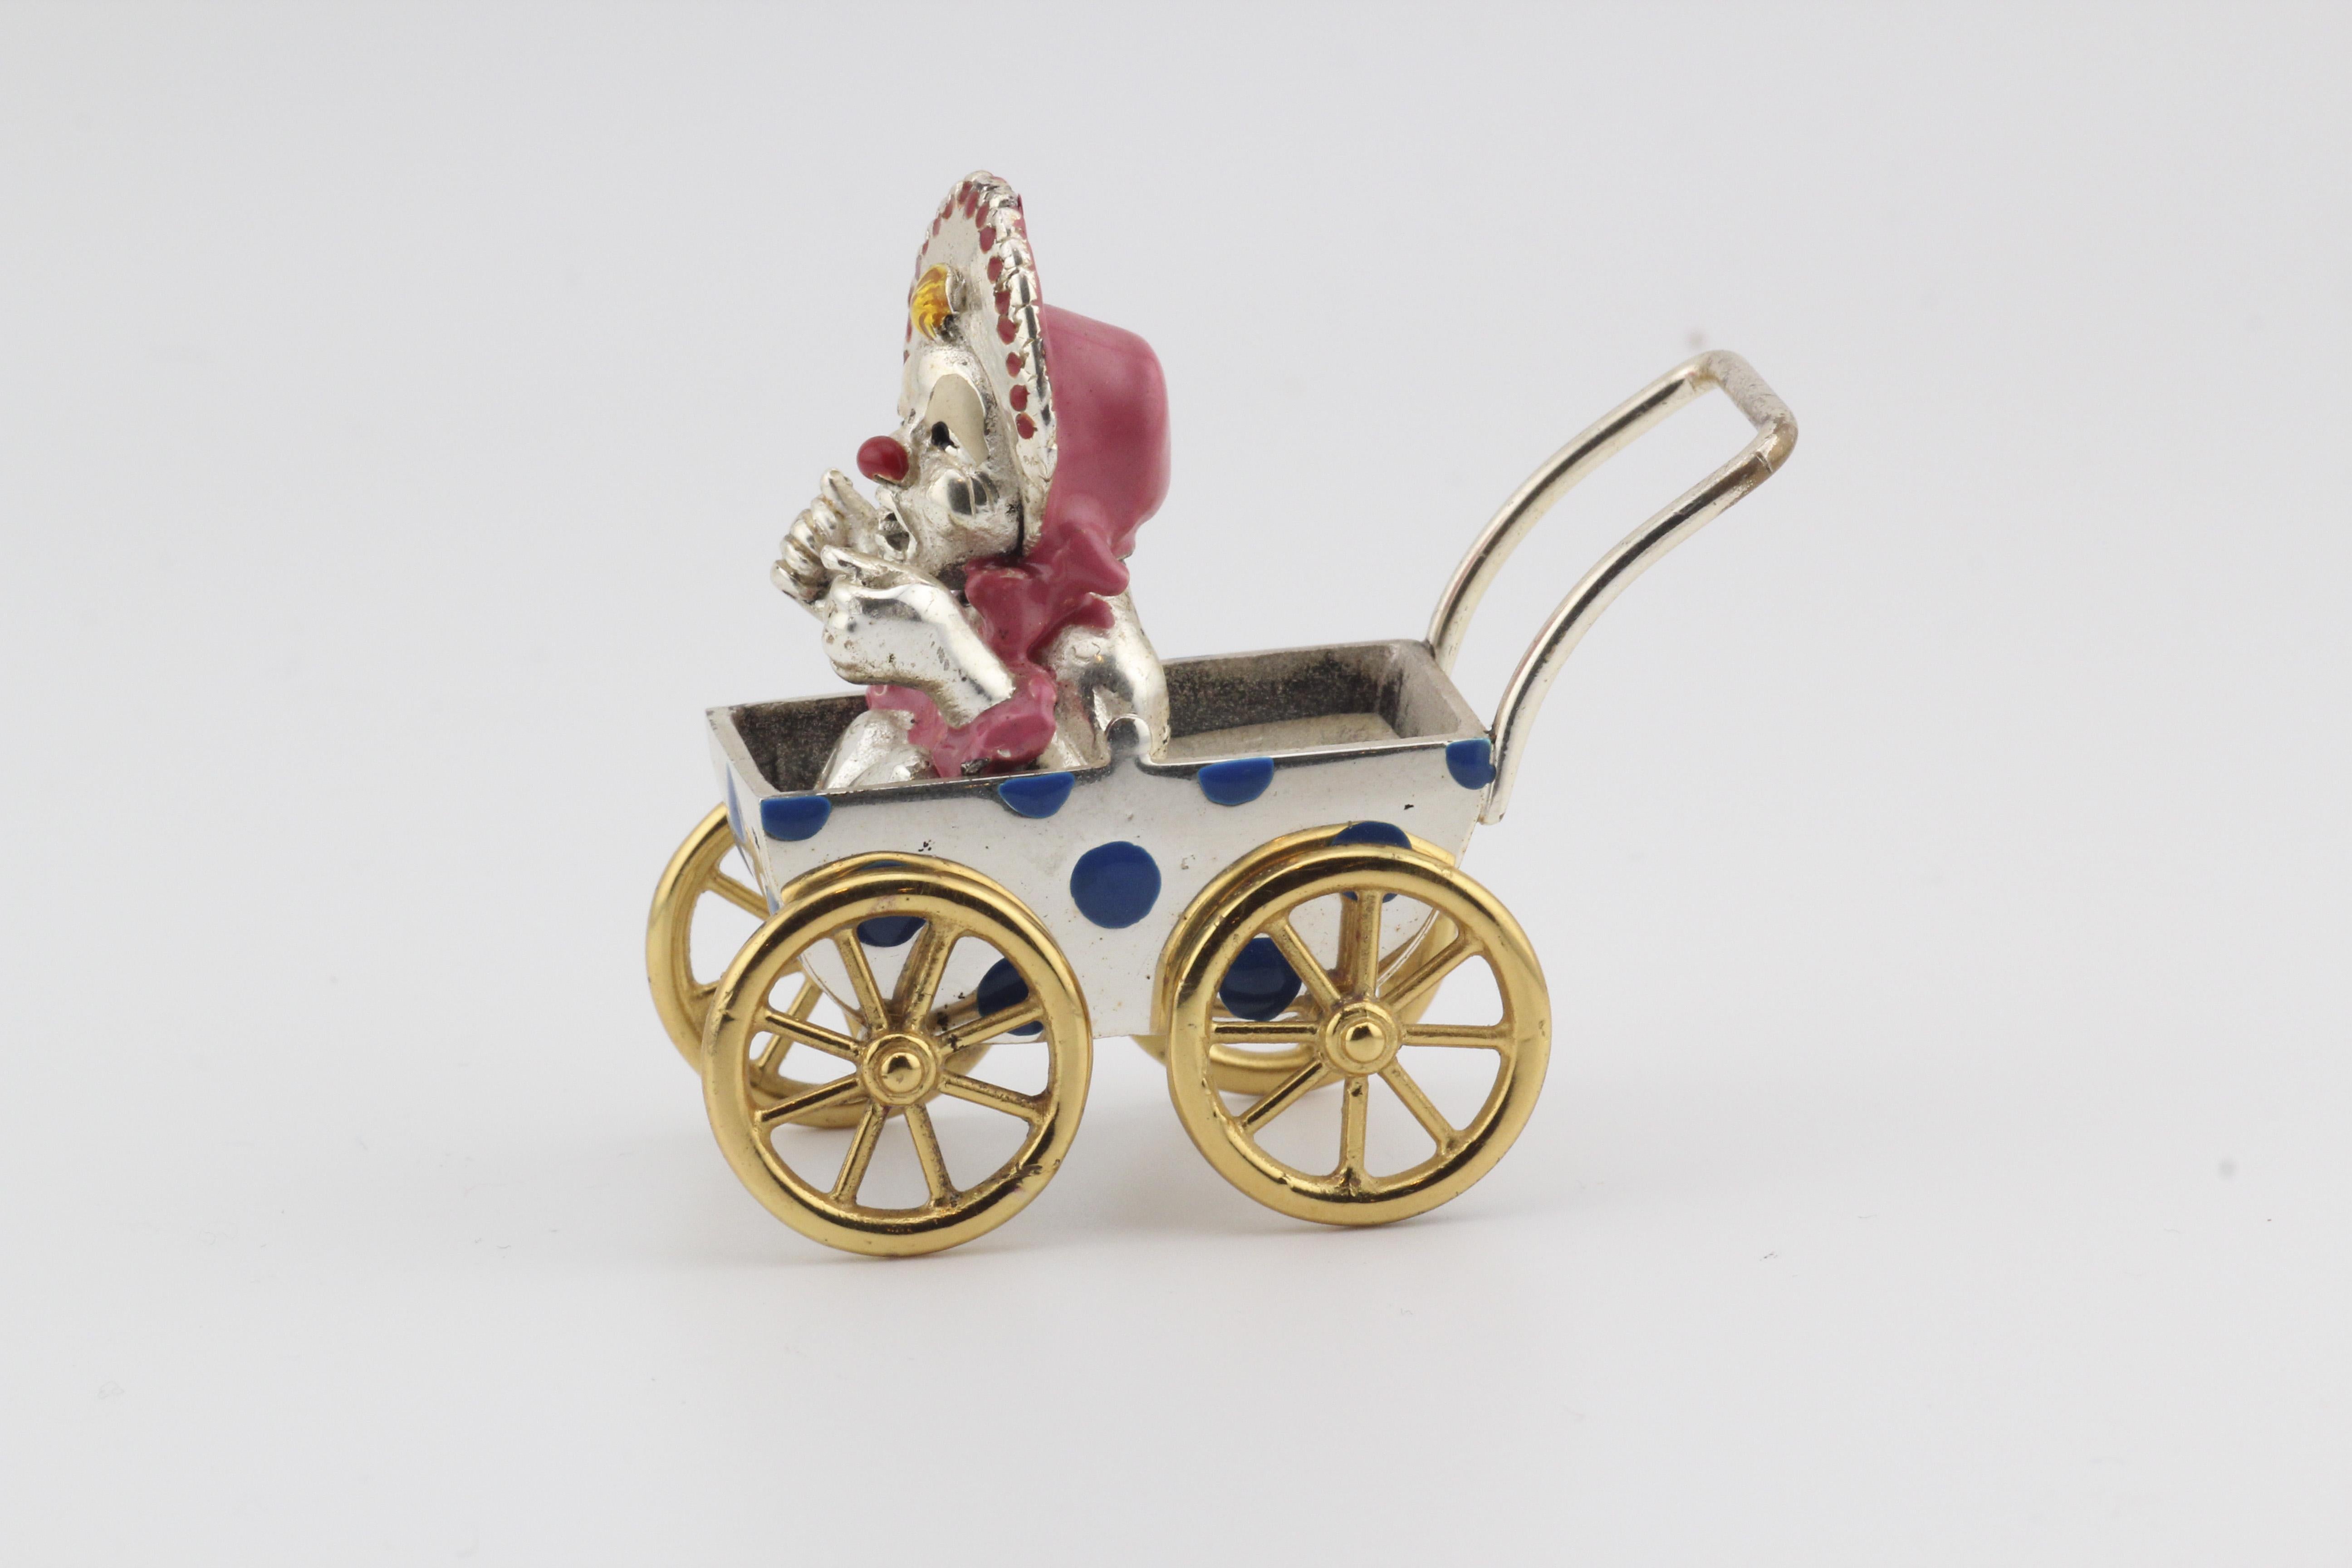 Tiffany & Co. Silver & Enamel Circus Clown Mother & Baby in Carriage Figurine 7